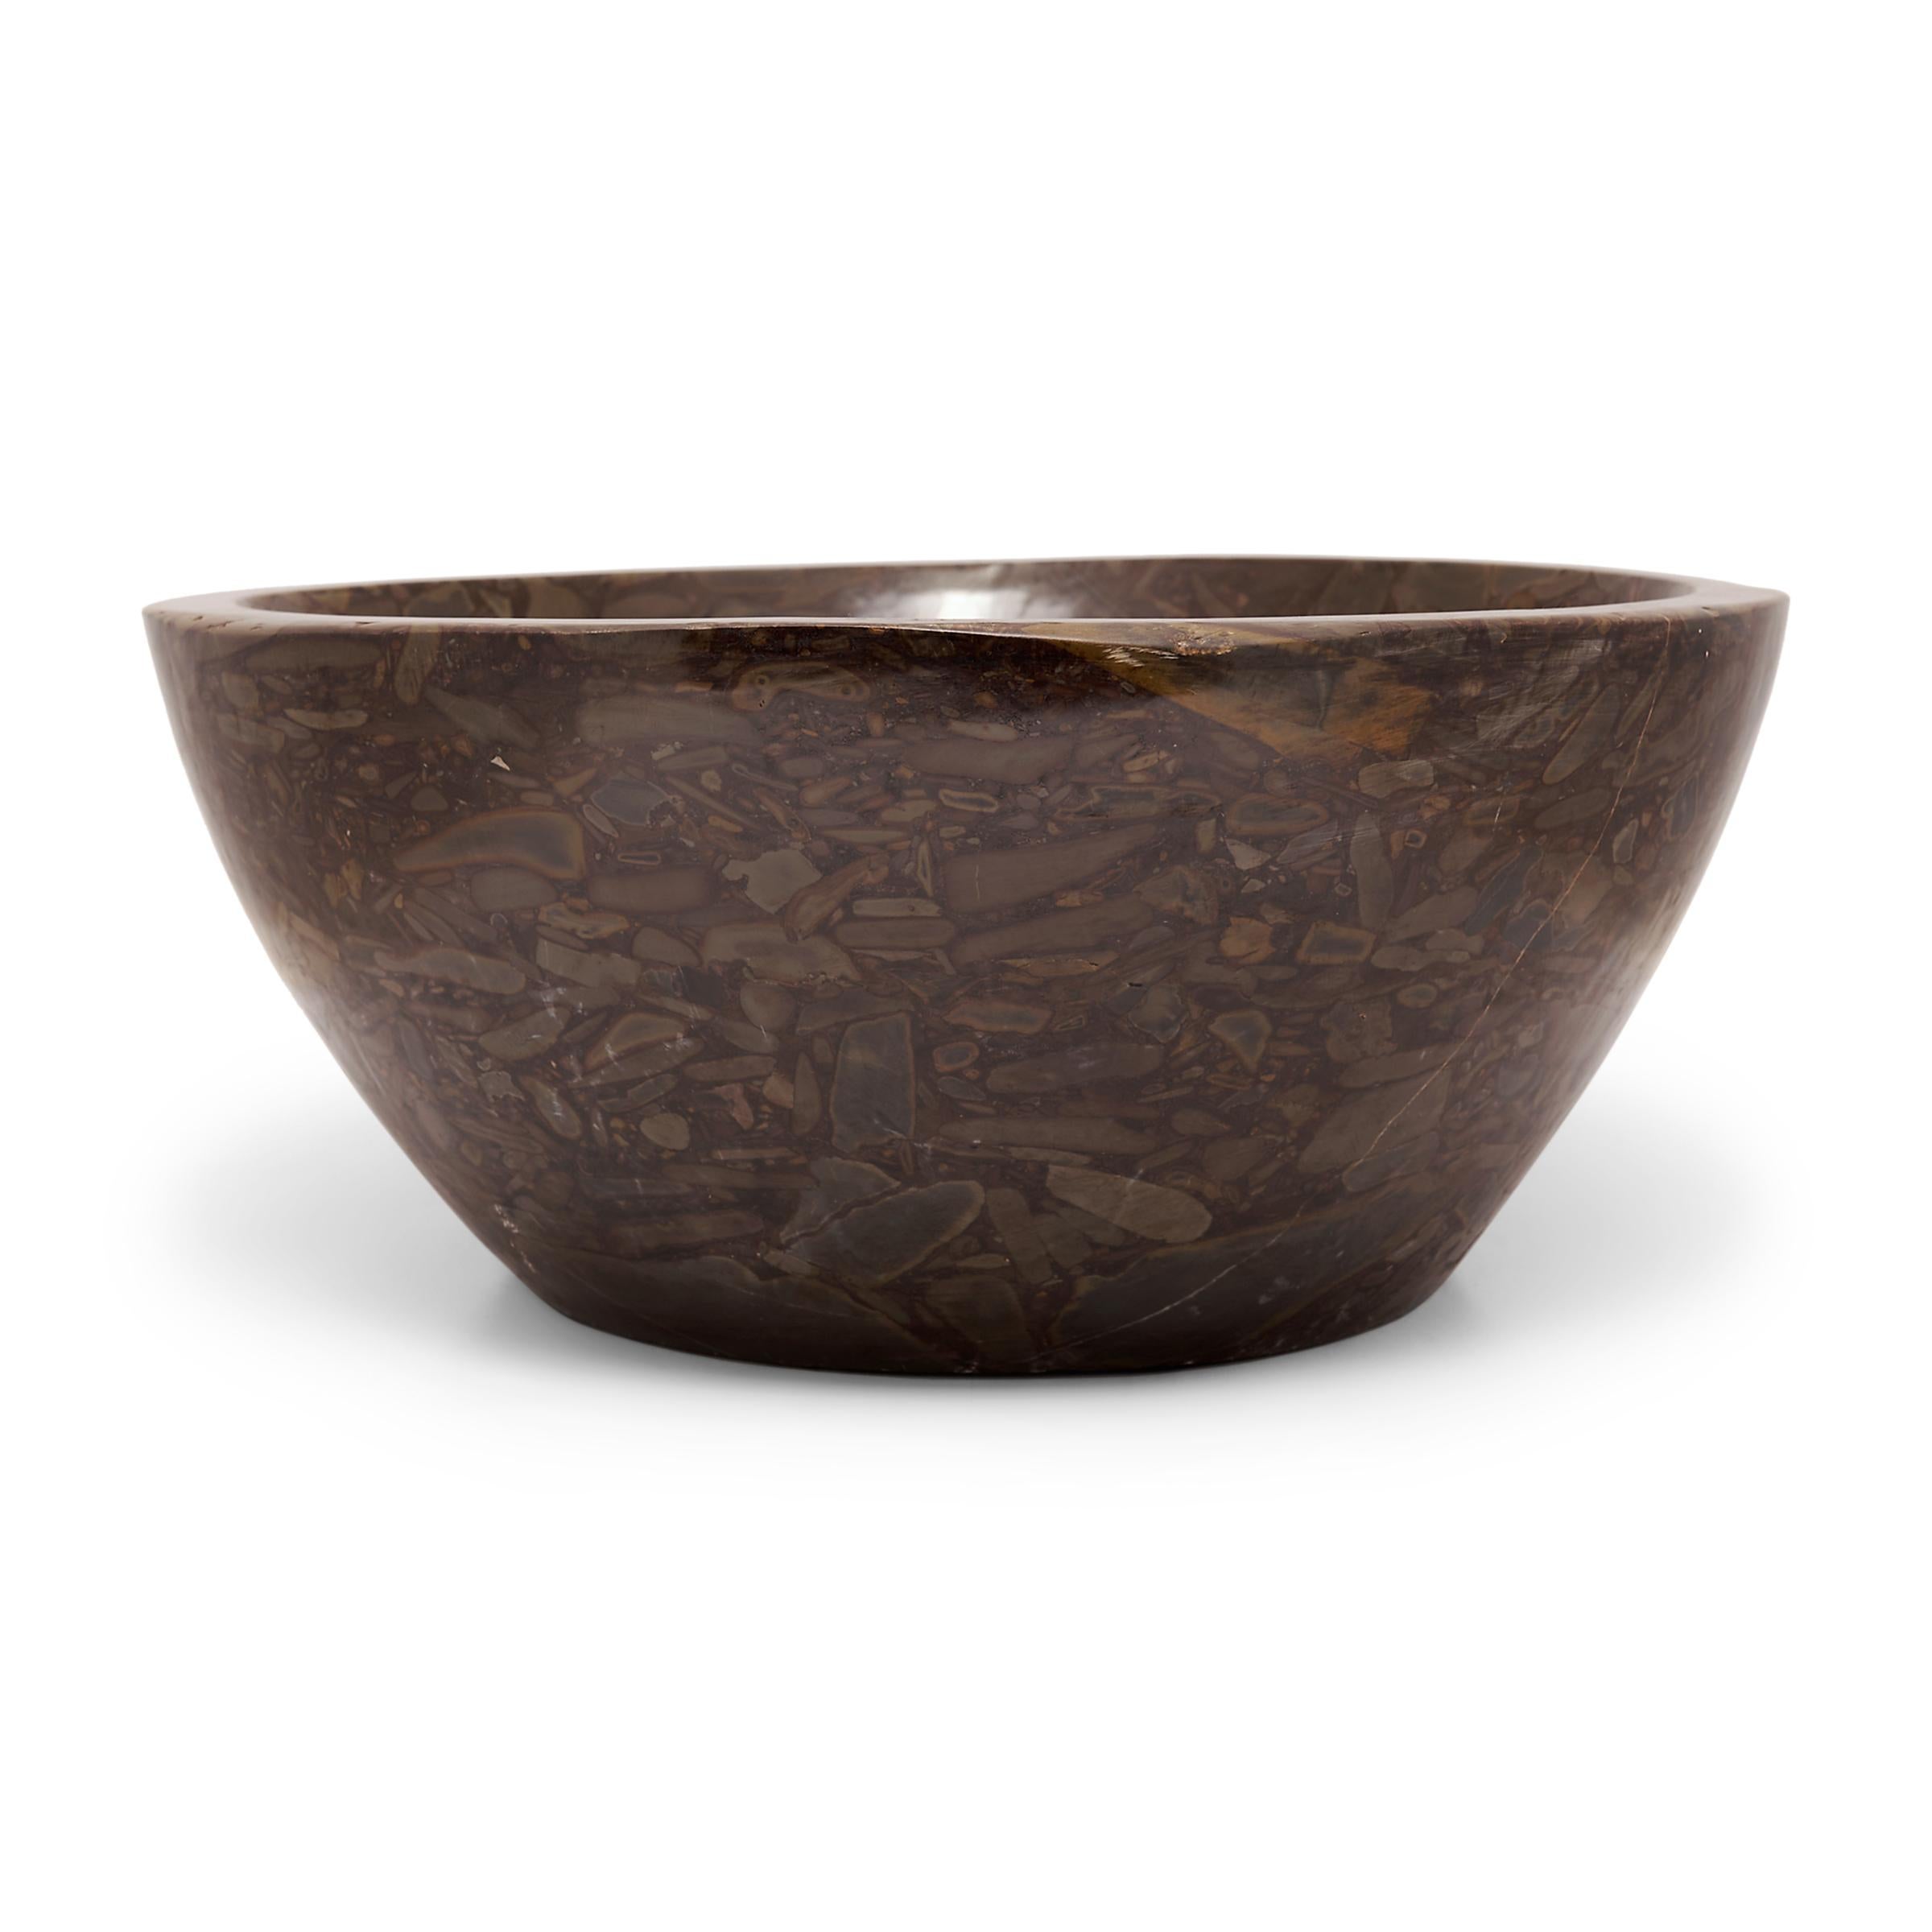 This clean-lined stone basin was hand-carved with a tapered form by artisans in China's Shandong province. Though it looks like a meticulous painting, the mesmerizing pattern of the puddingstone is actually inherent to the stone, a conglomerate